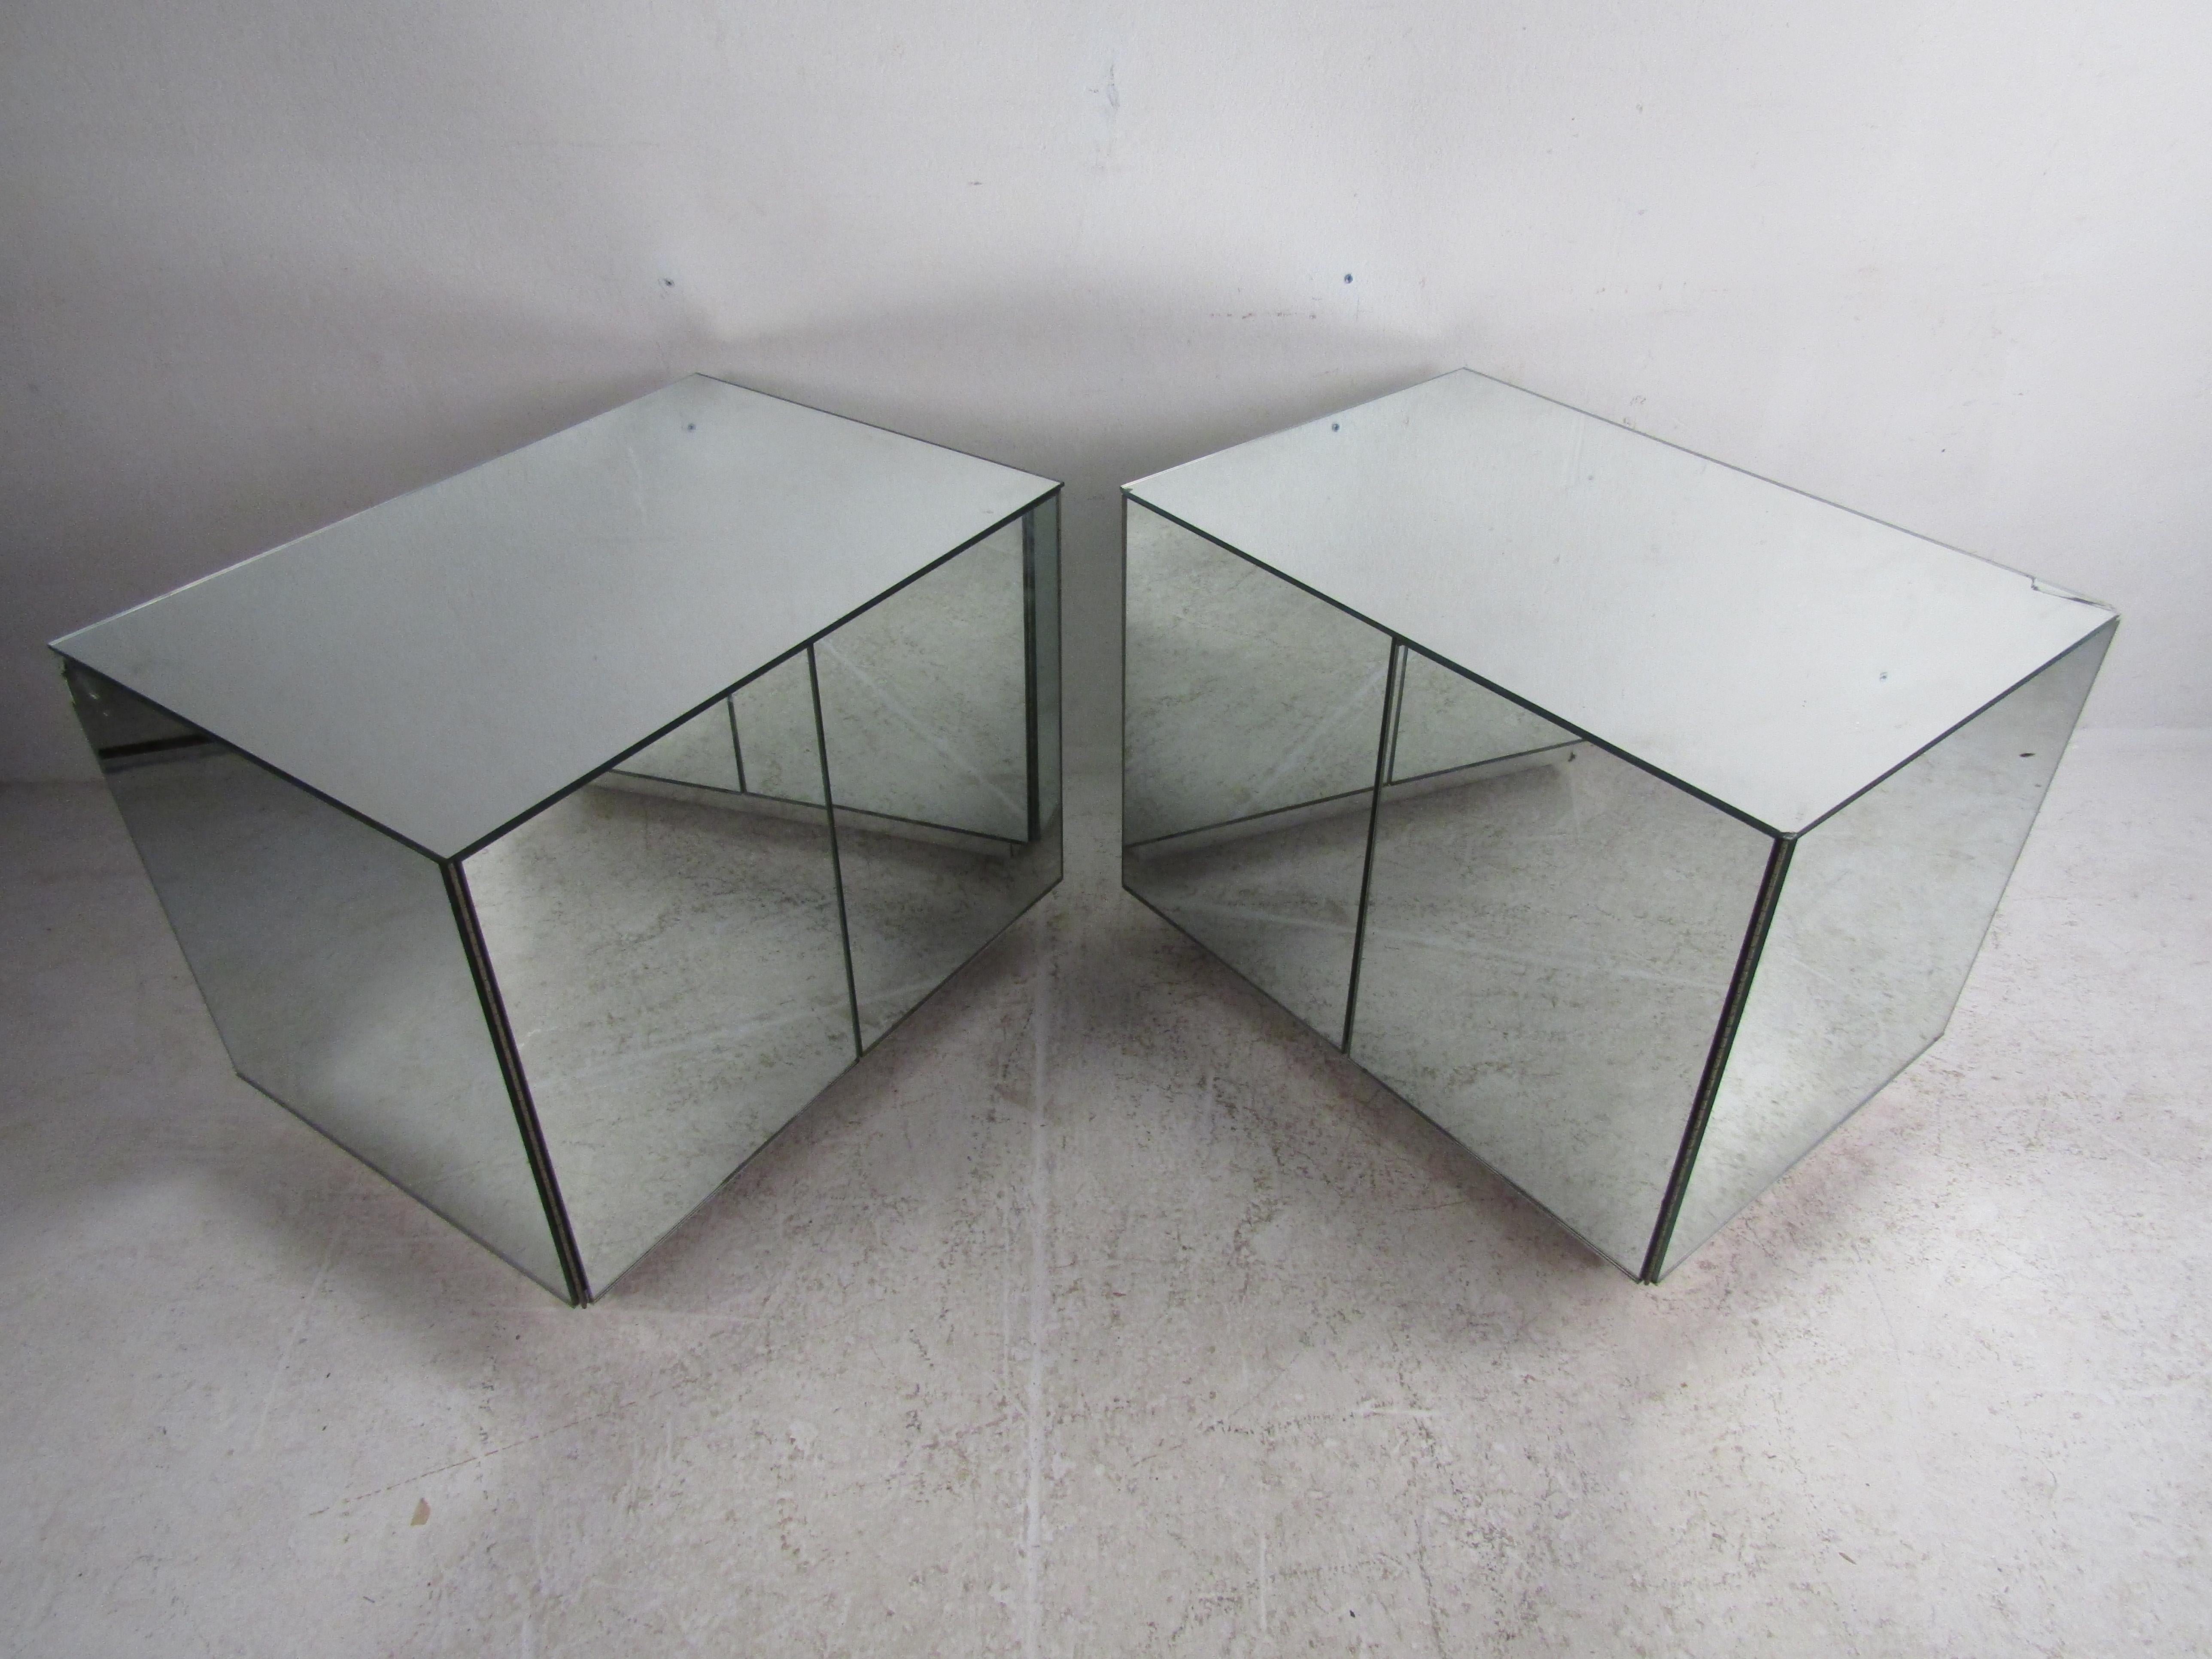 This stunning pair of vintage mirrored cabinets featuring push to open doors revealing ample storage. These unique pieces have multiple sliding drawers along with one adjustable shelf. The mirror finish adds a beautiful touch to this truly hard to